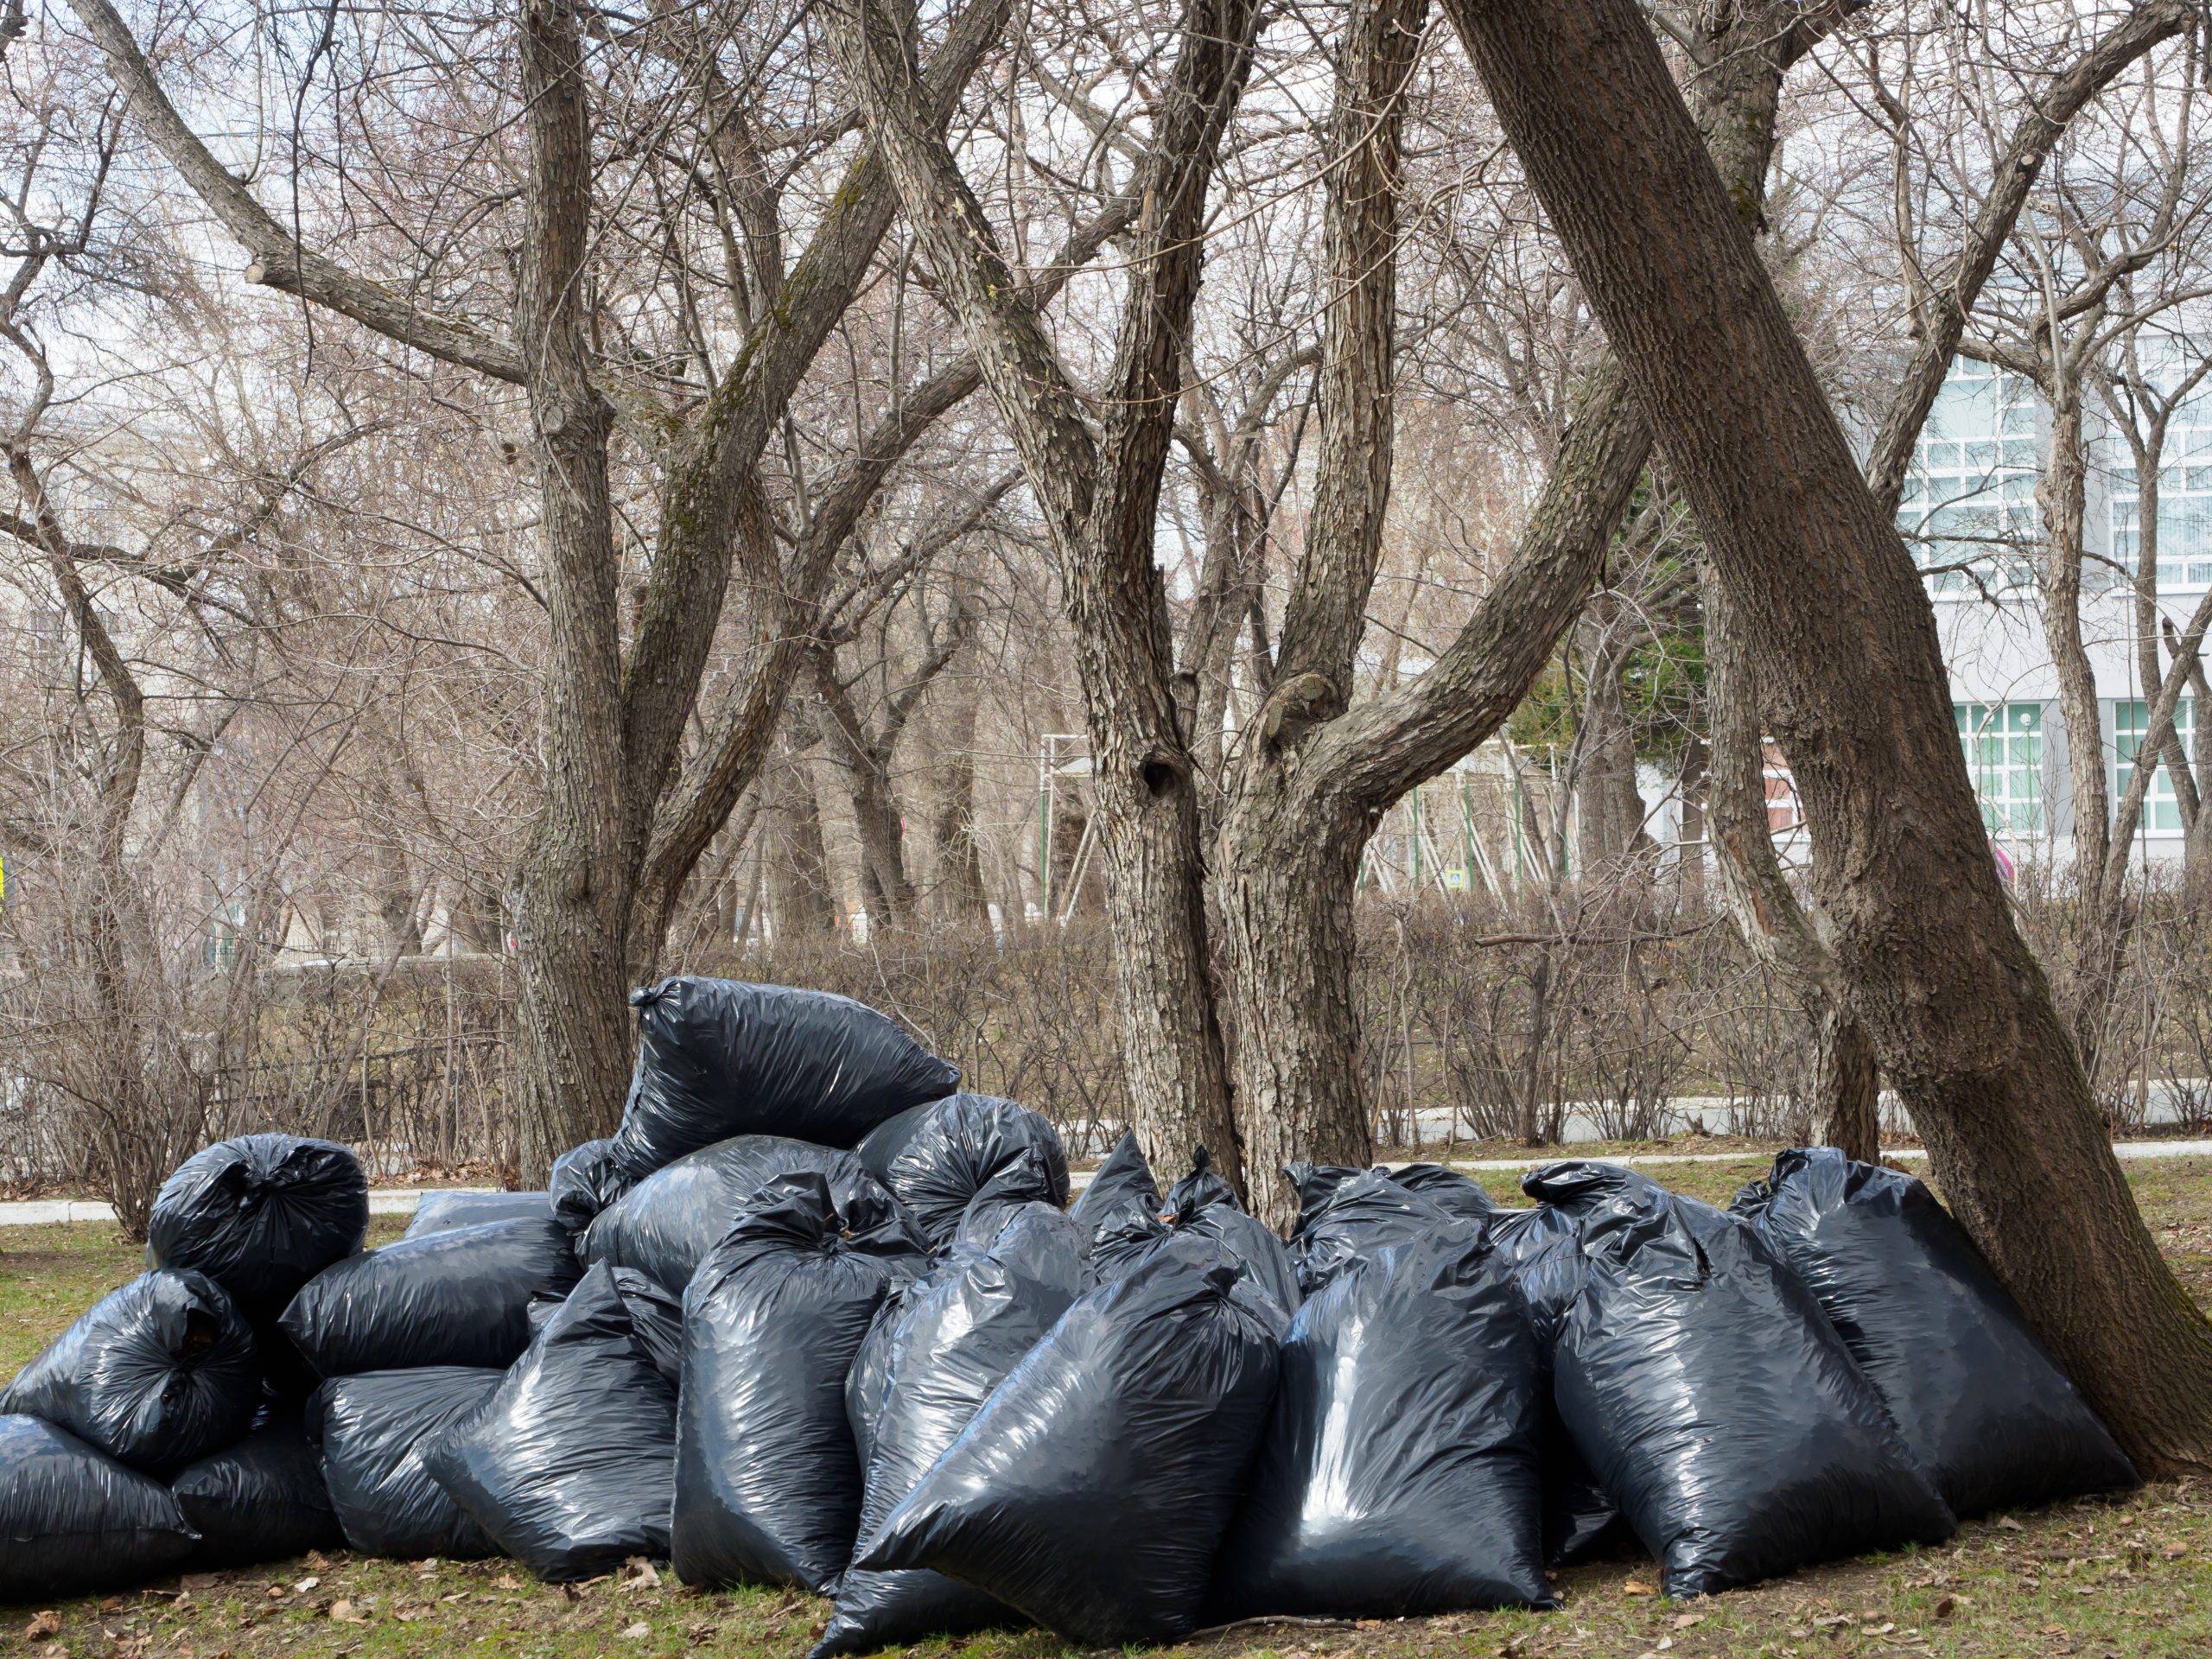 Can The Junk Guys assist with yard waste removal for commercial properties in Edmonton?